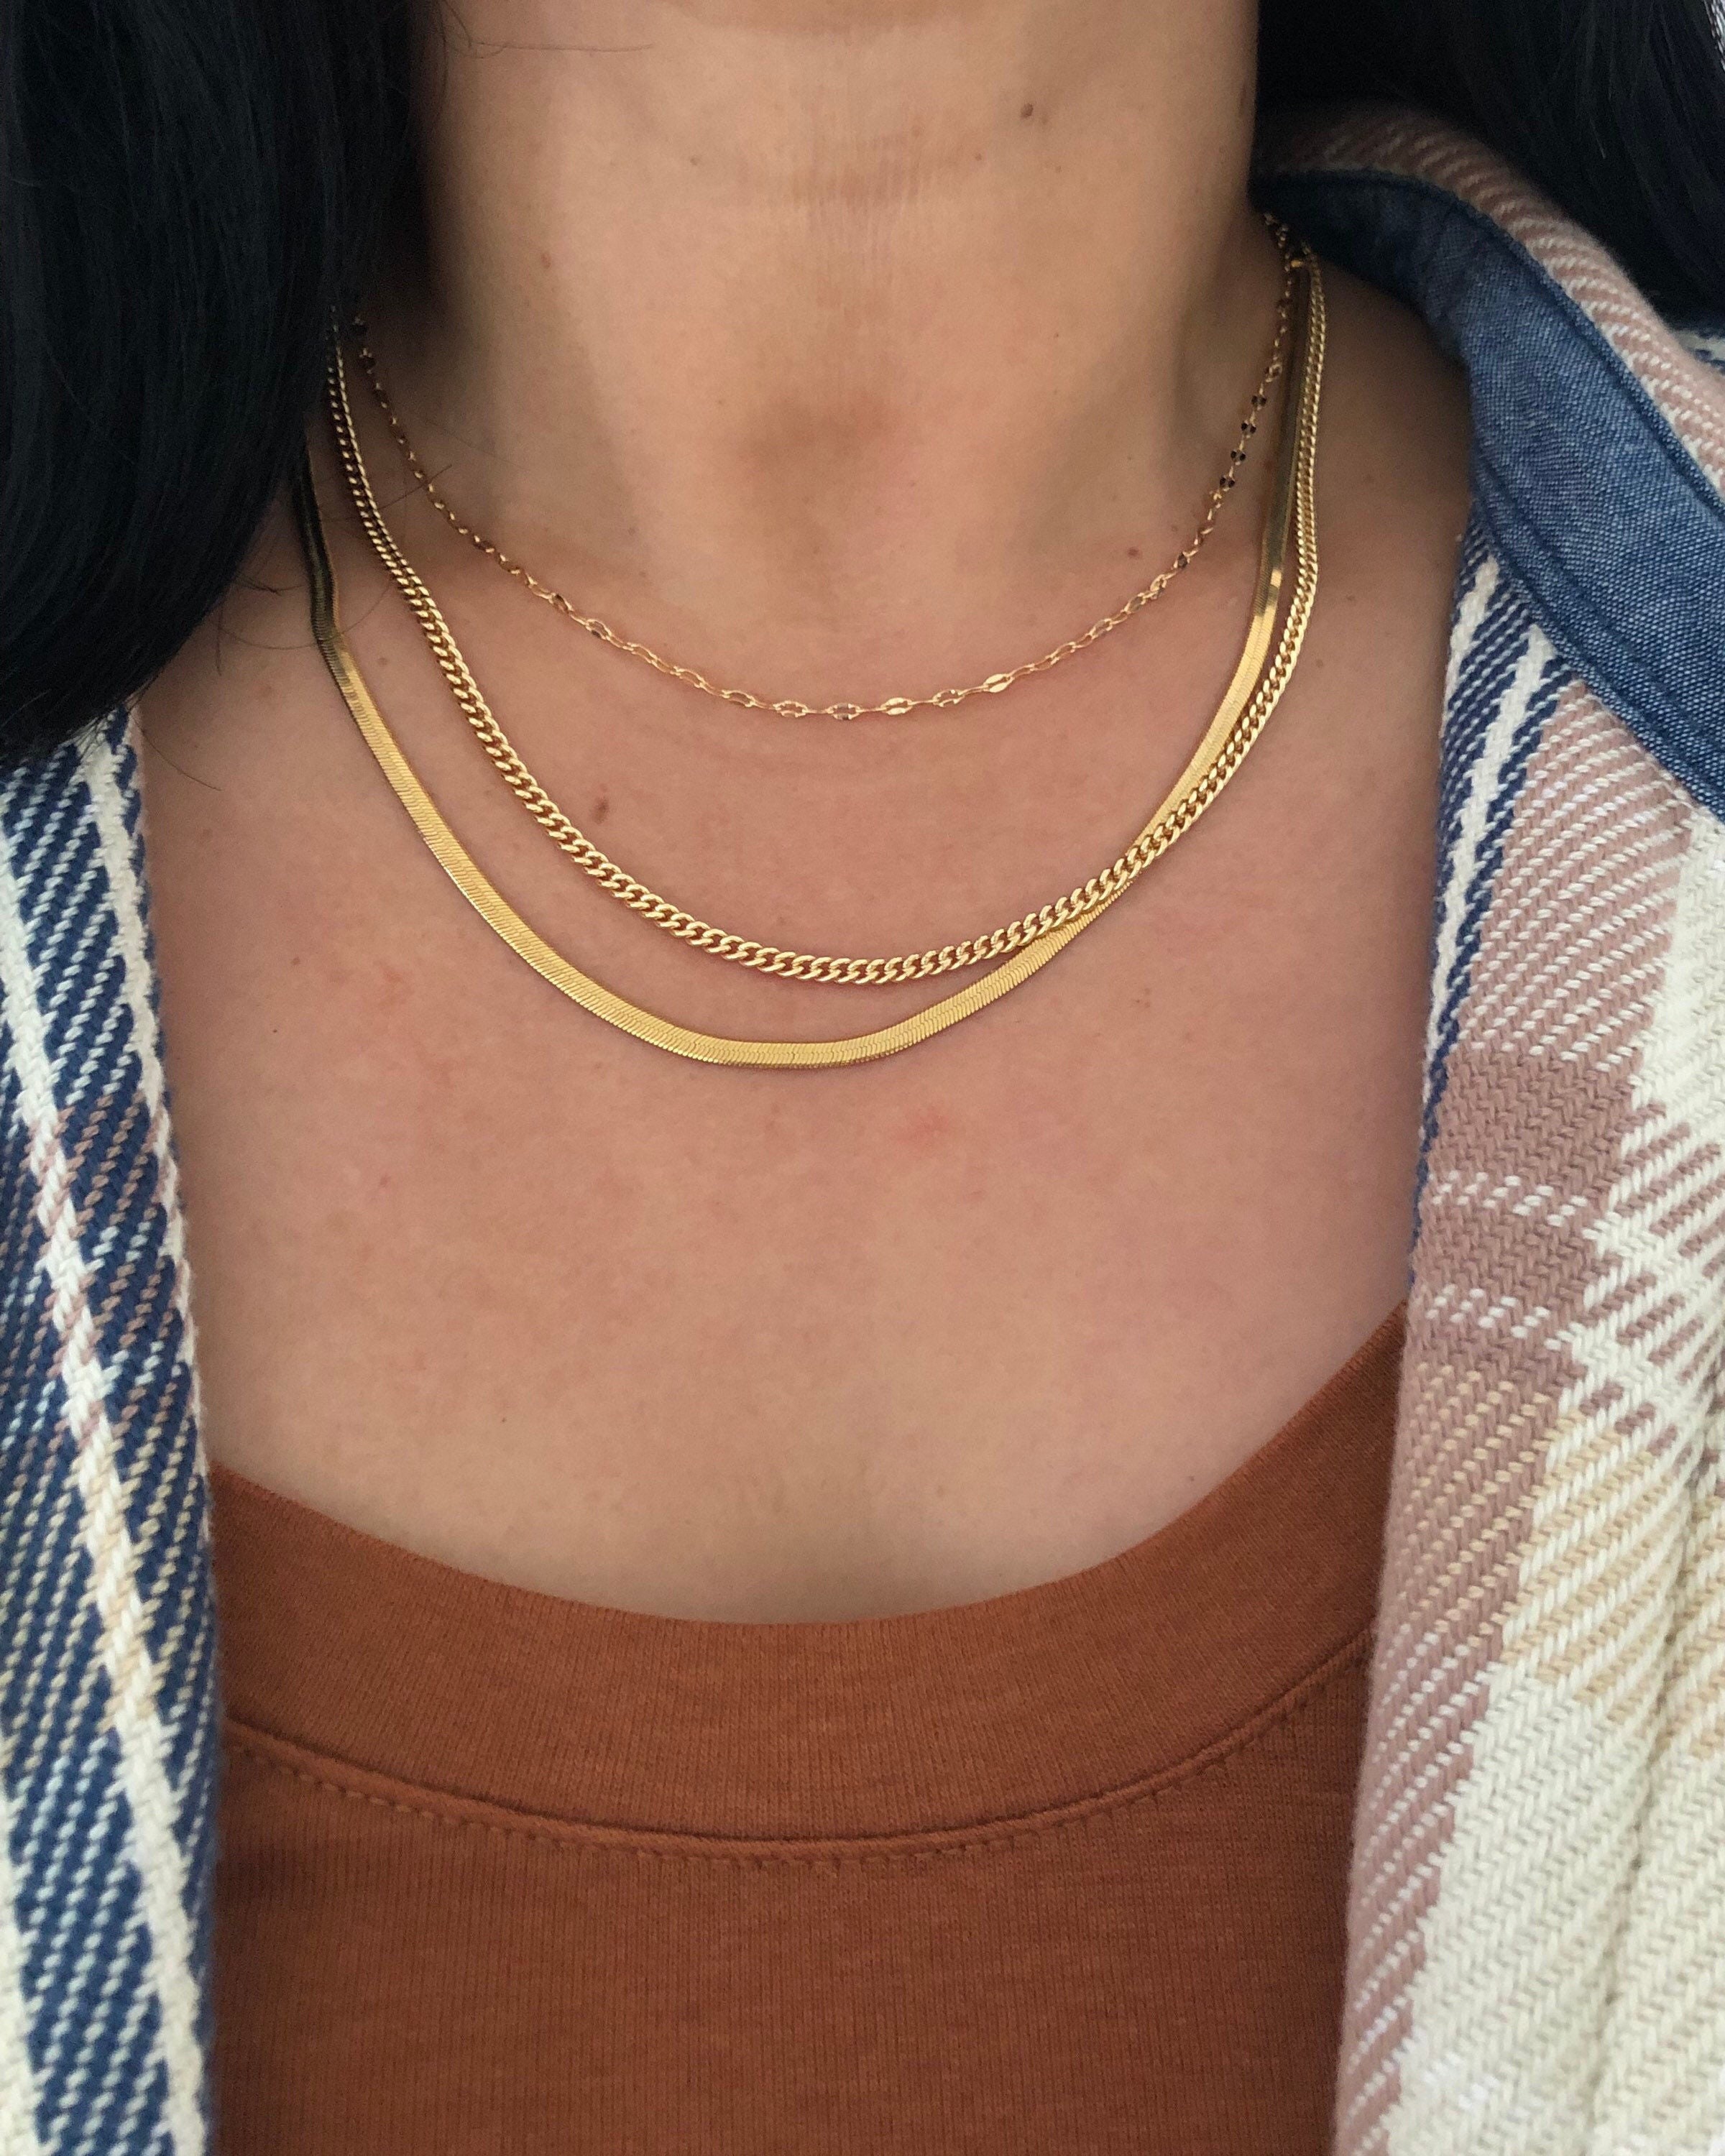 Lacie Necklace: Gold Filled Chain with Oval Disc and Link Alternating Design